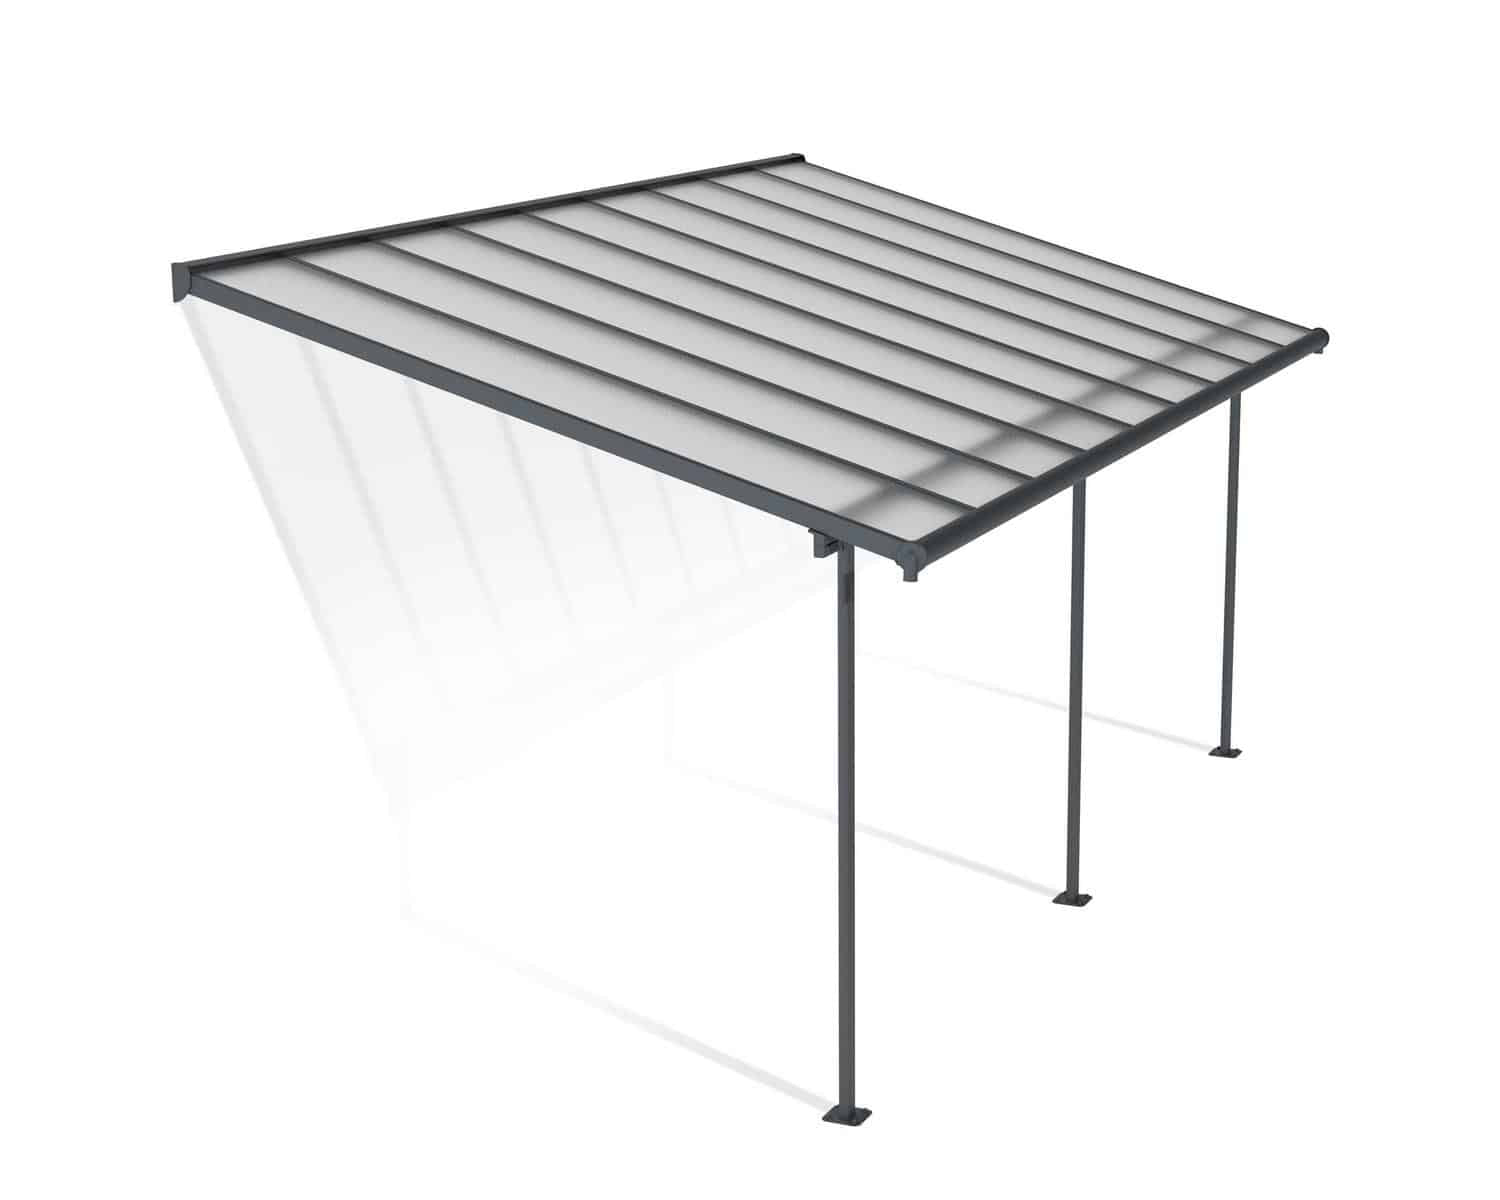 Canopia By Palram Sierra Patio Cover 3 x 7.3m Grey Clear